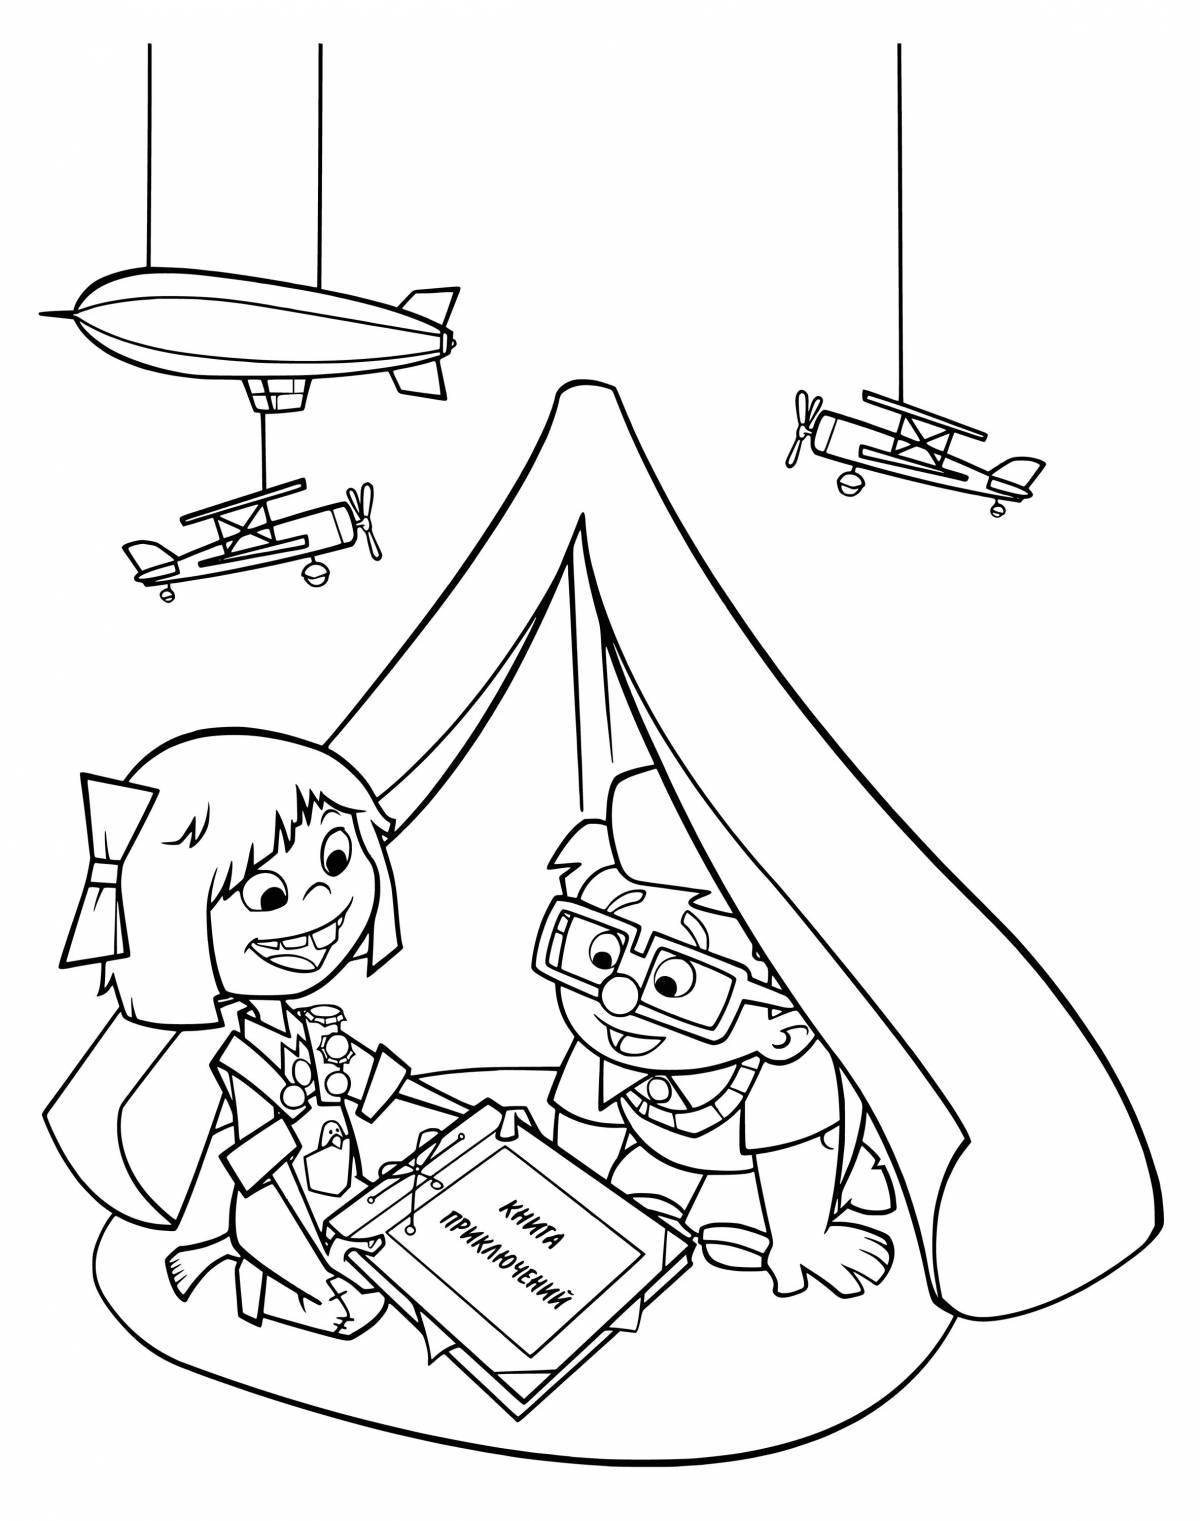 Coloring page great trip